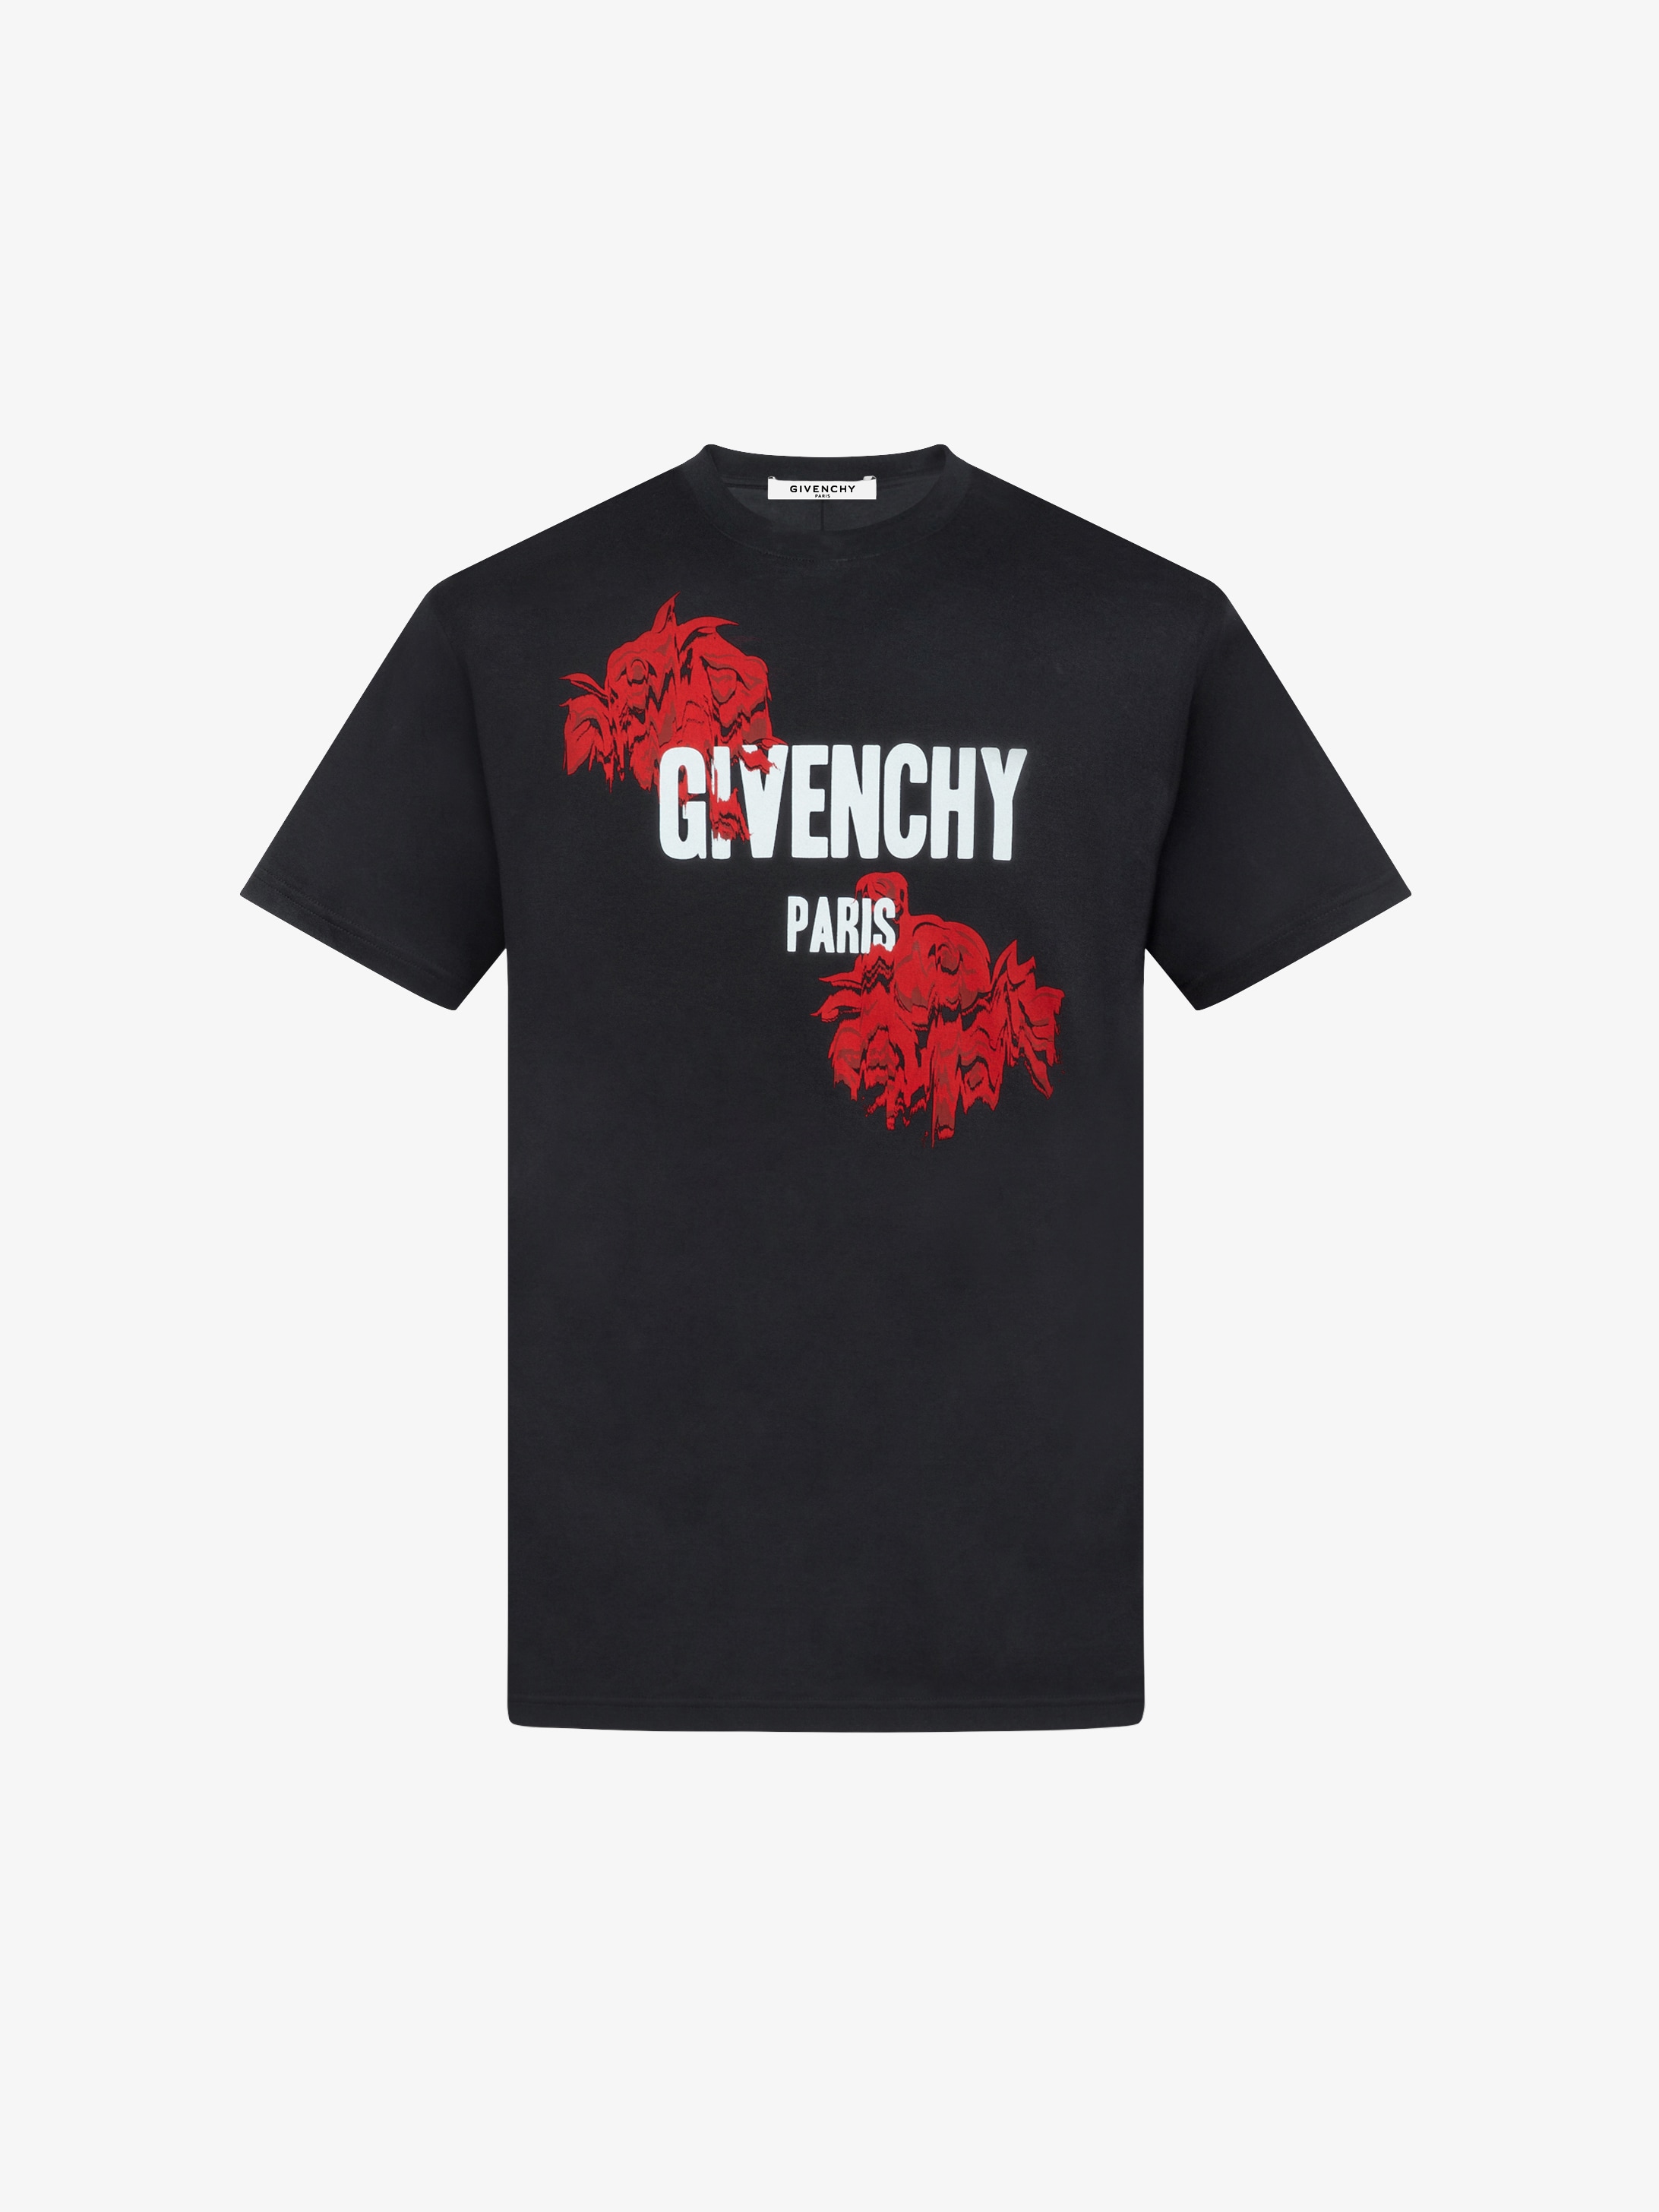 givenchy paris t shirt black and red